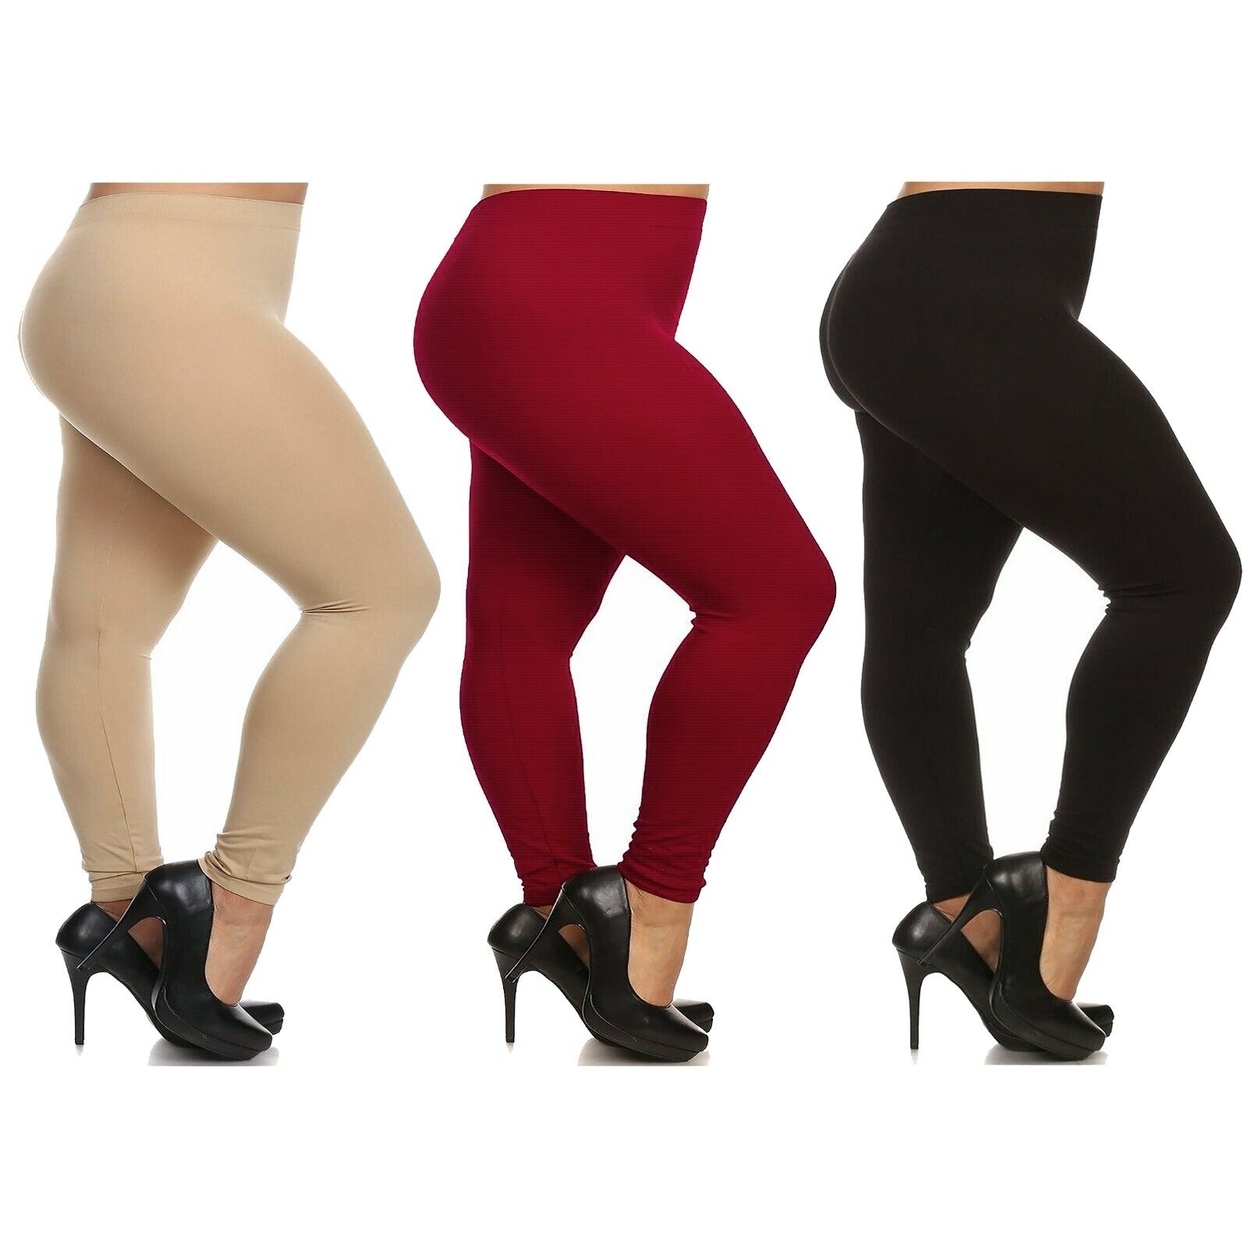 3-Pack: Women's Casual Ultra-Soft Smooth High Waisted Athletic Active Yoga Leggings Plus Size Available - Red,red,red, 4x